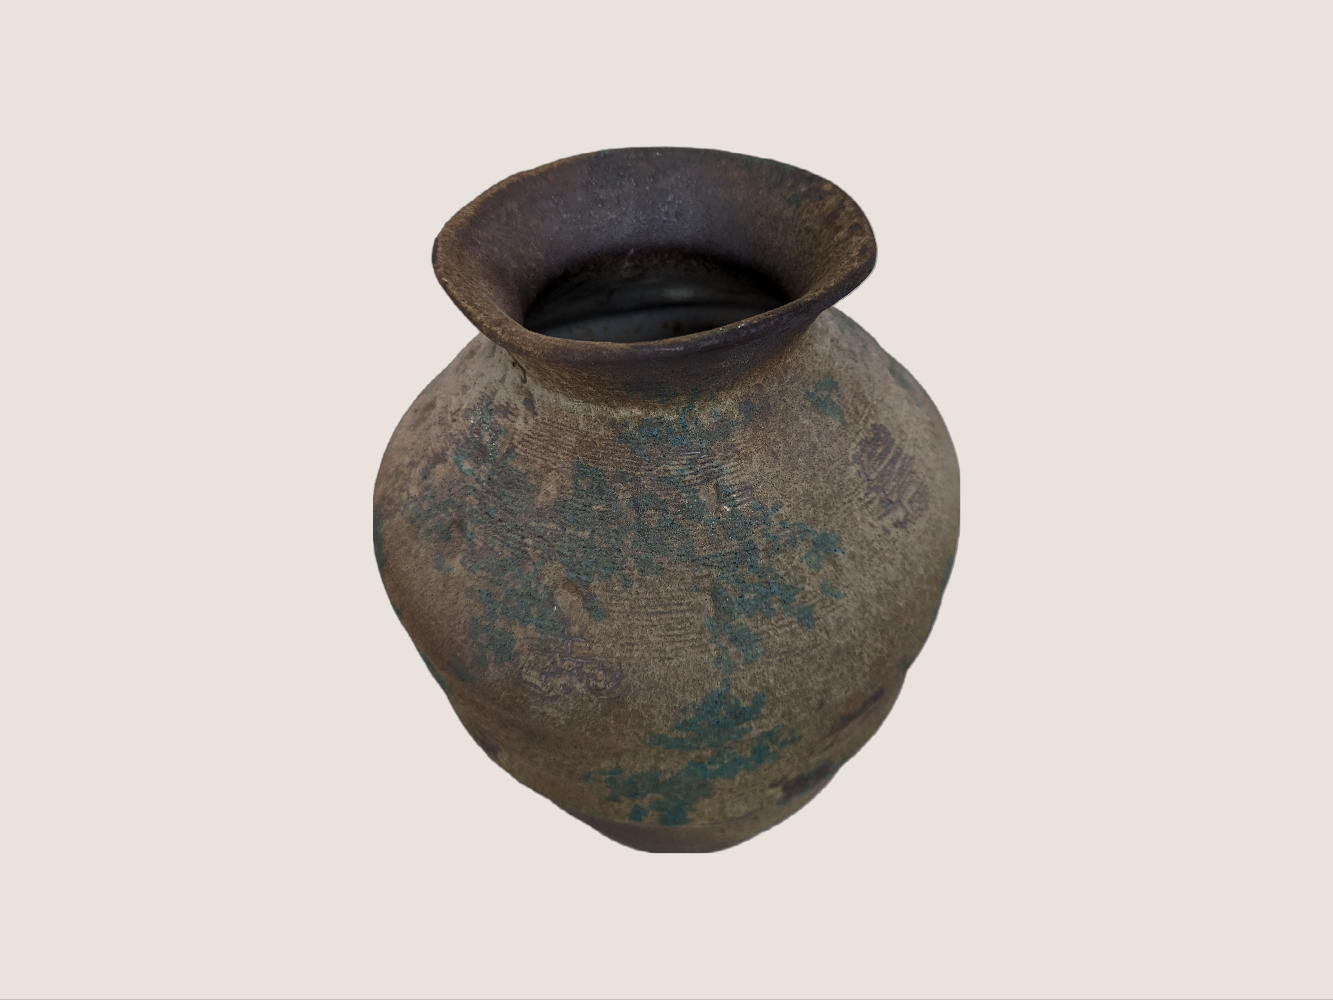 Antique look. Dark terra cotta vase, 12 inches tall in urn shape with brown color, with natural accents of gray, blue, and black.